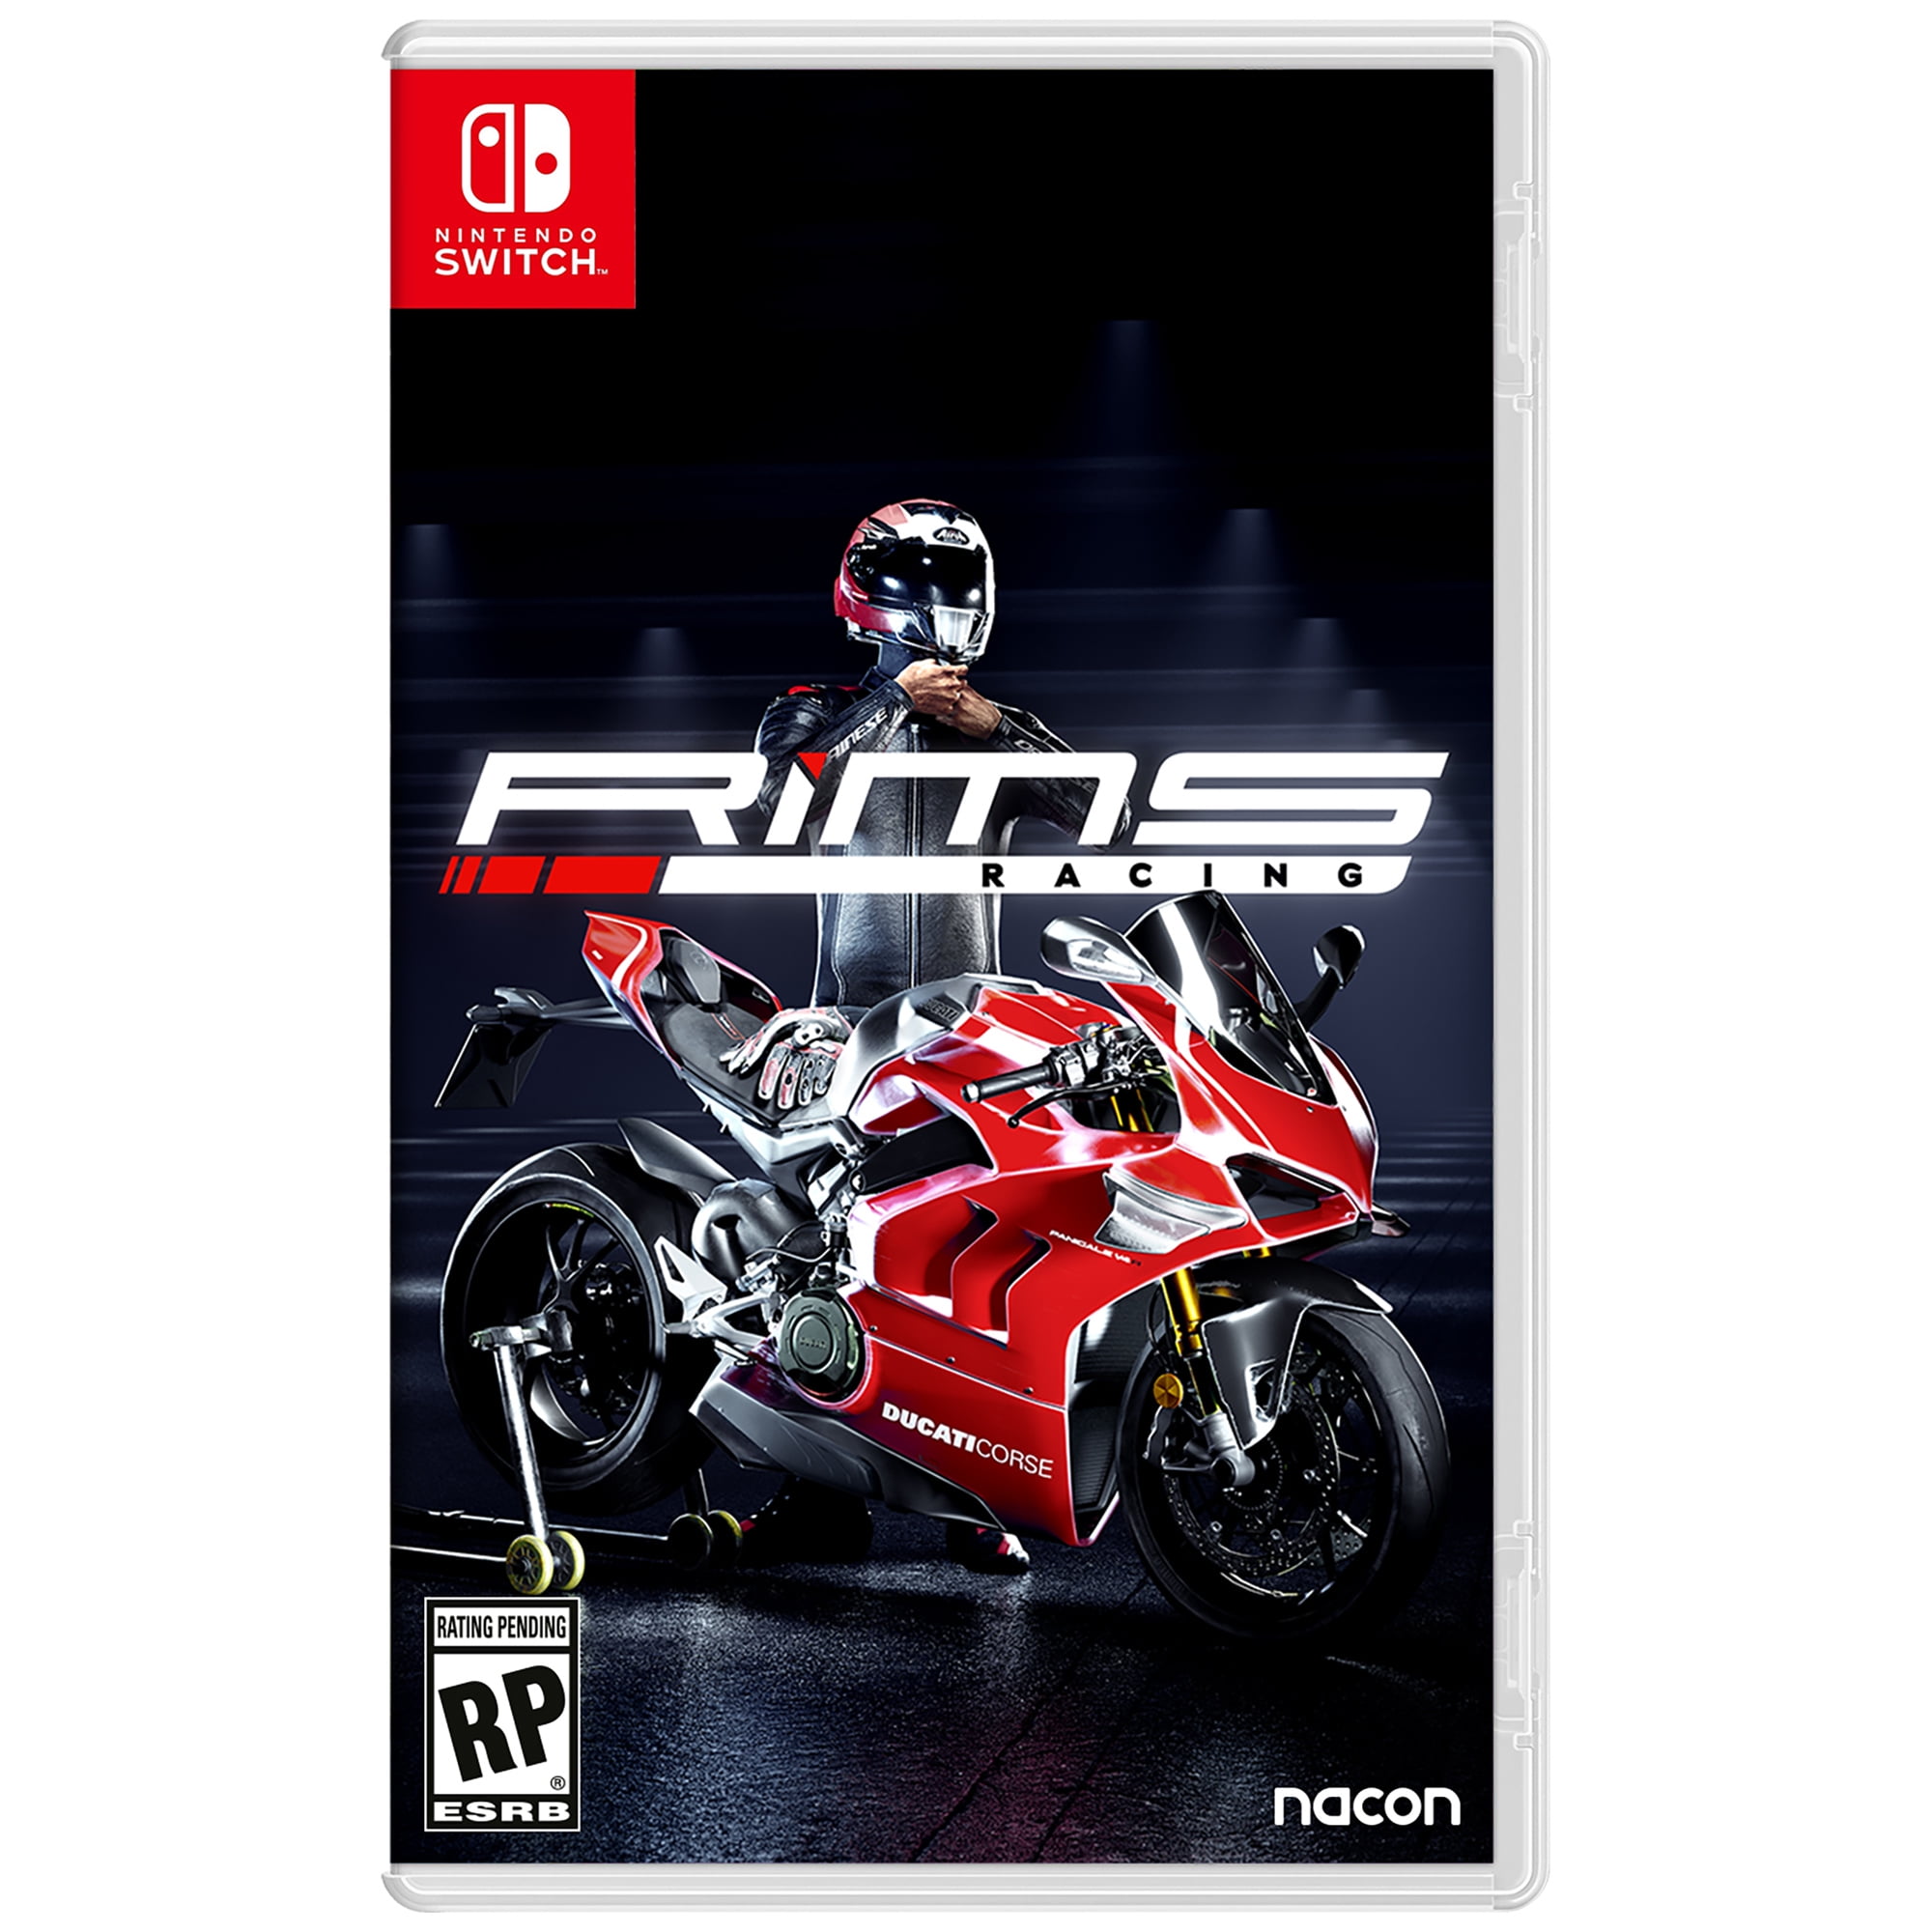 Racing nintendo switch. WRC Generations Nintendo Switch. Fast & Furious: Spy Racers Rise of sh1ft3r. Smufrs Racing Switch.